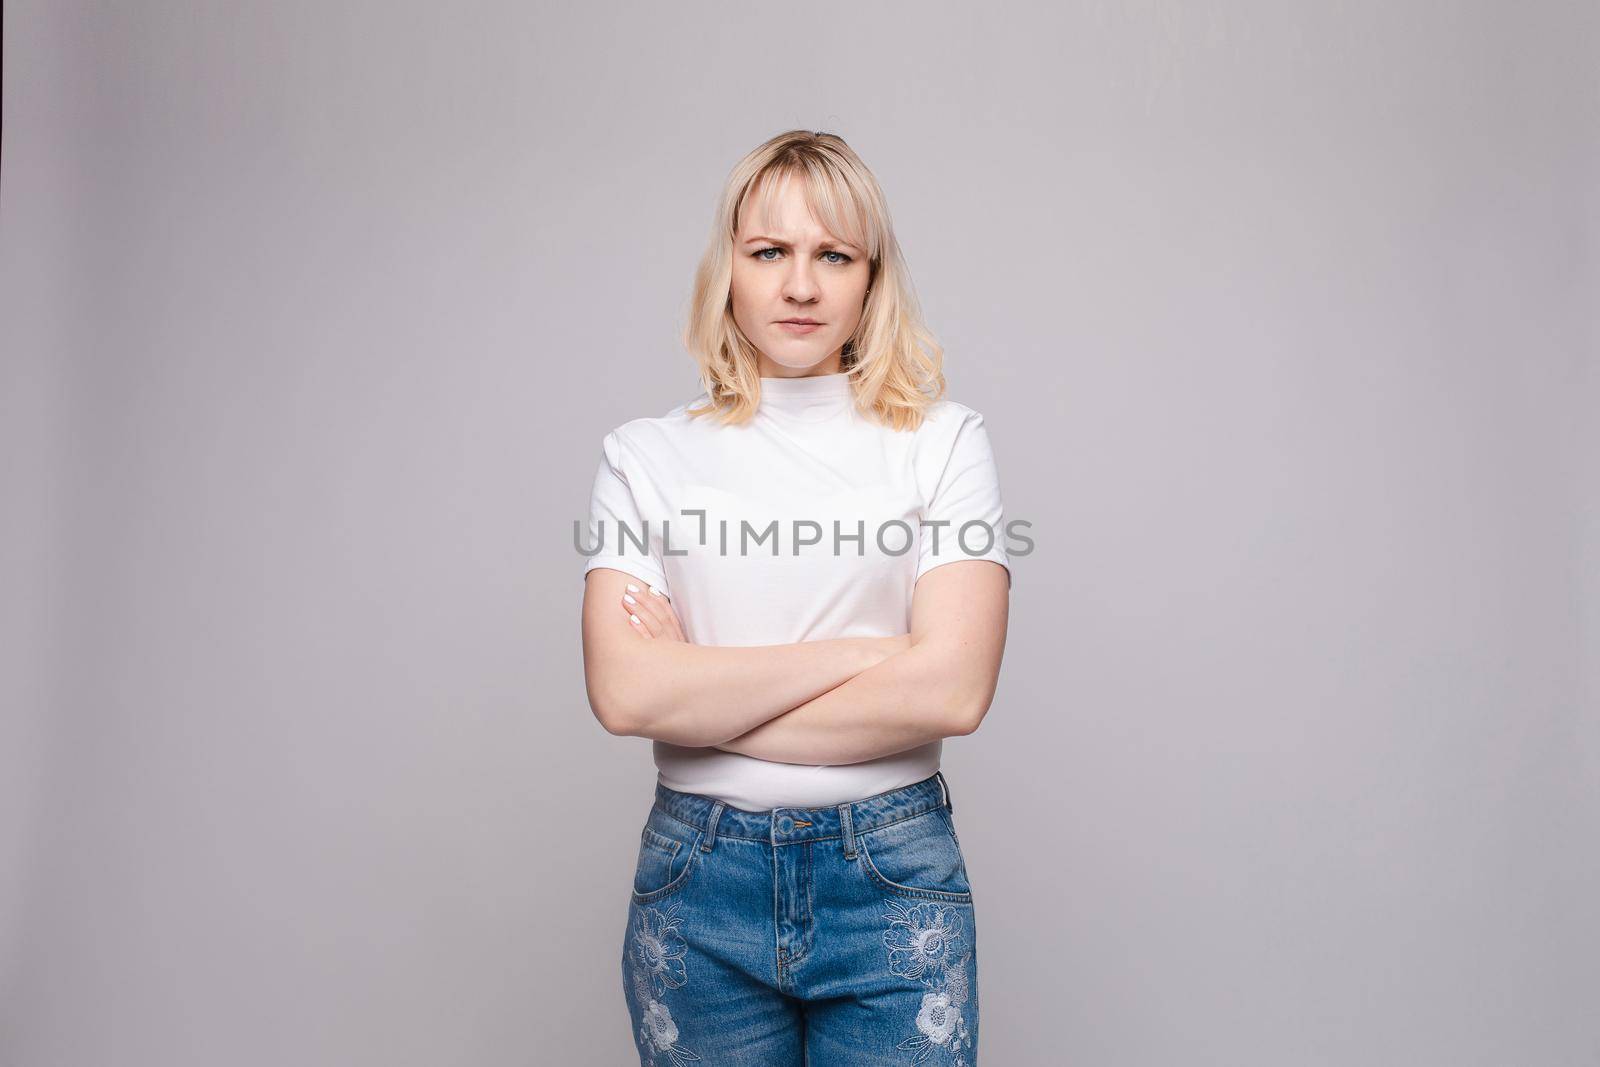 Studio portrait of unsatisfied young brunette caucasian woman with wavy hair in overall with colorful pattern holding arms folded and looking at camera with grief, dissatisfaction, anger and disbelief. Isolate.